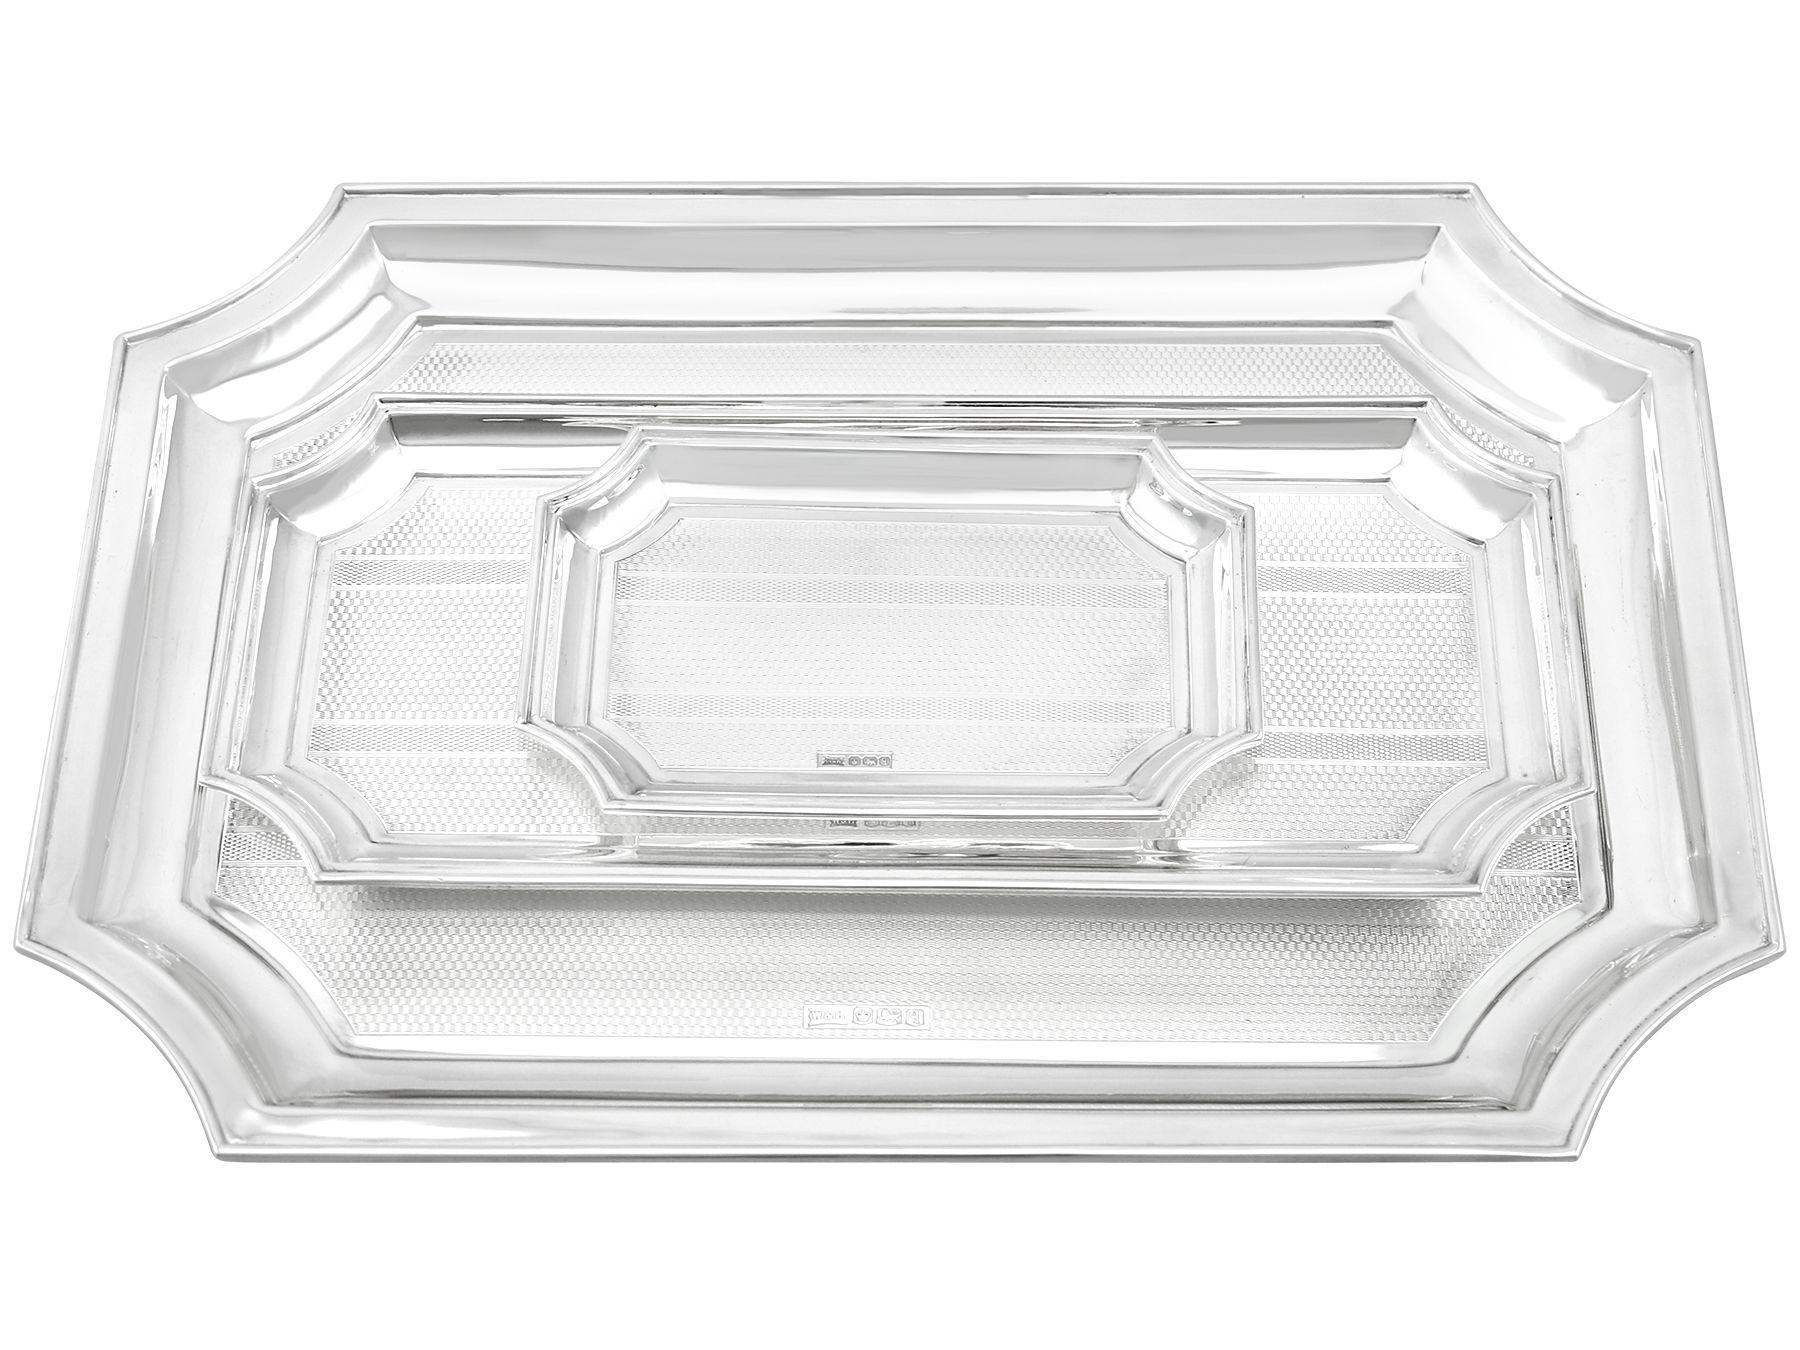 An exceptional, fine and impressive set of three antique George V English sterling silver trays - boxed; an addition to our range of collectable dining silverware.

These exceptional antique George V sterling silver trays have been crafted in